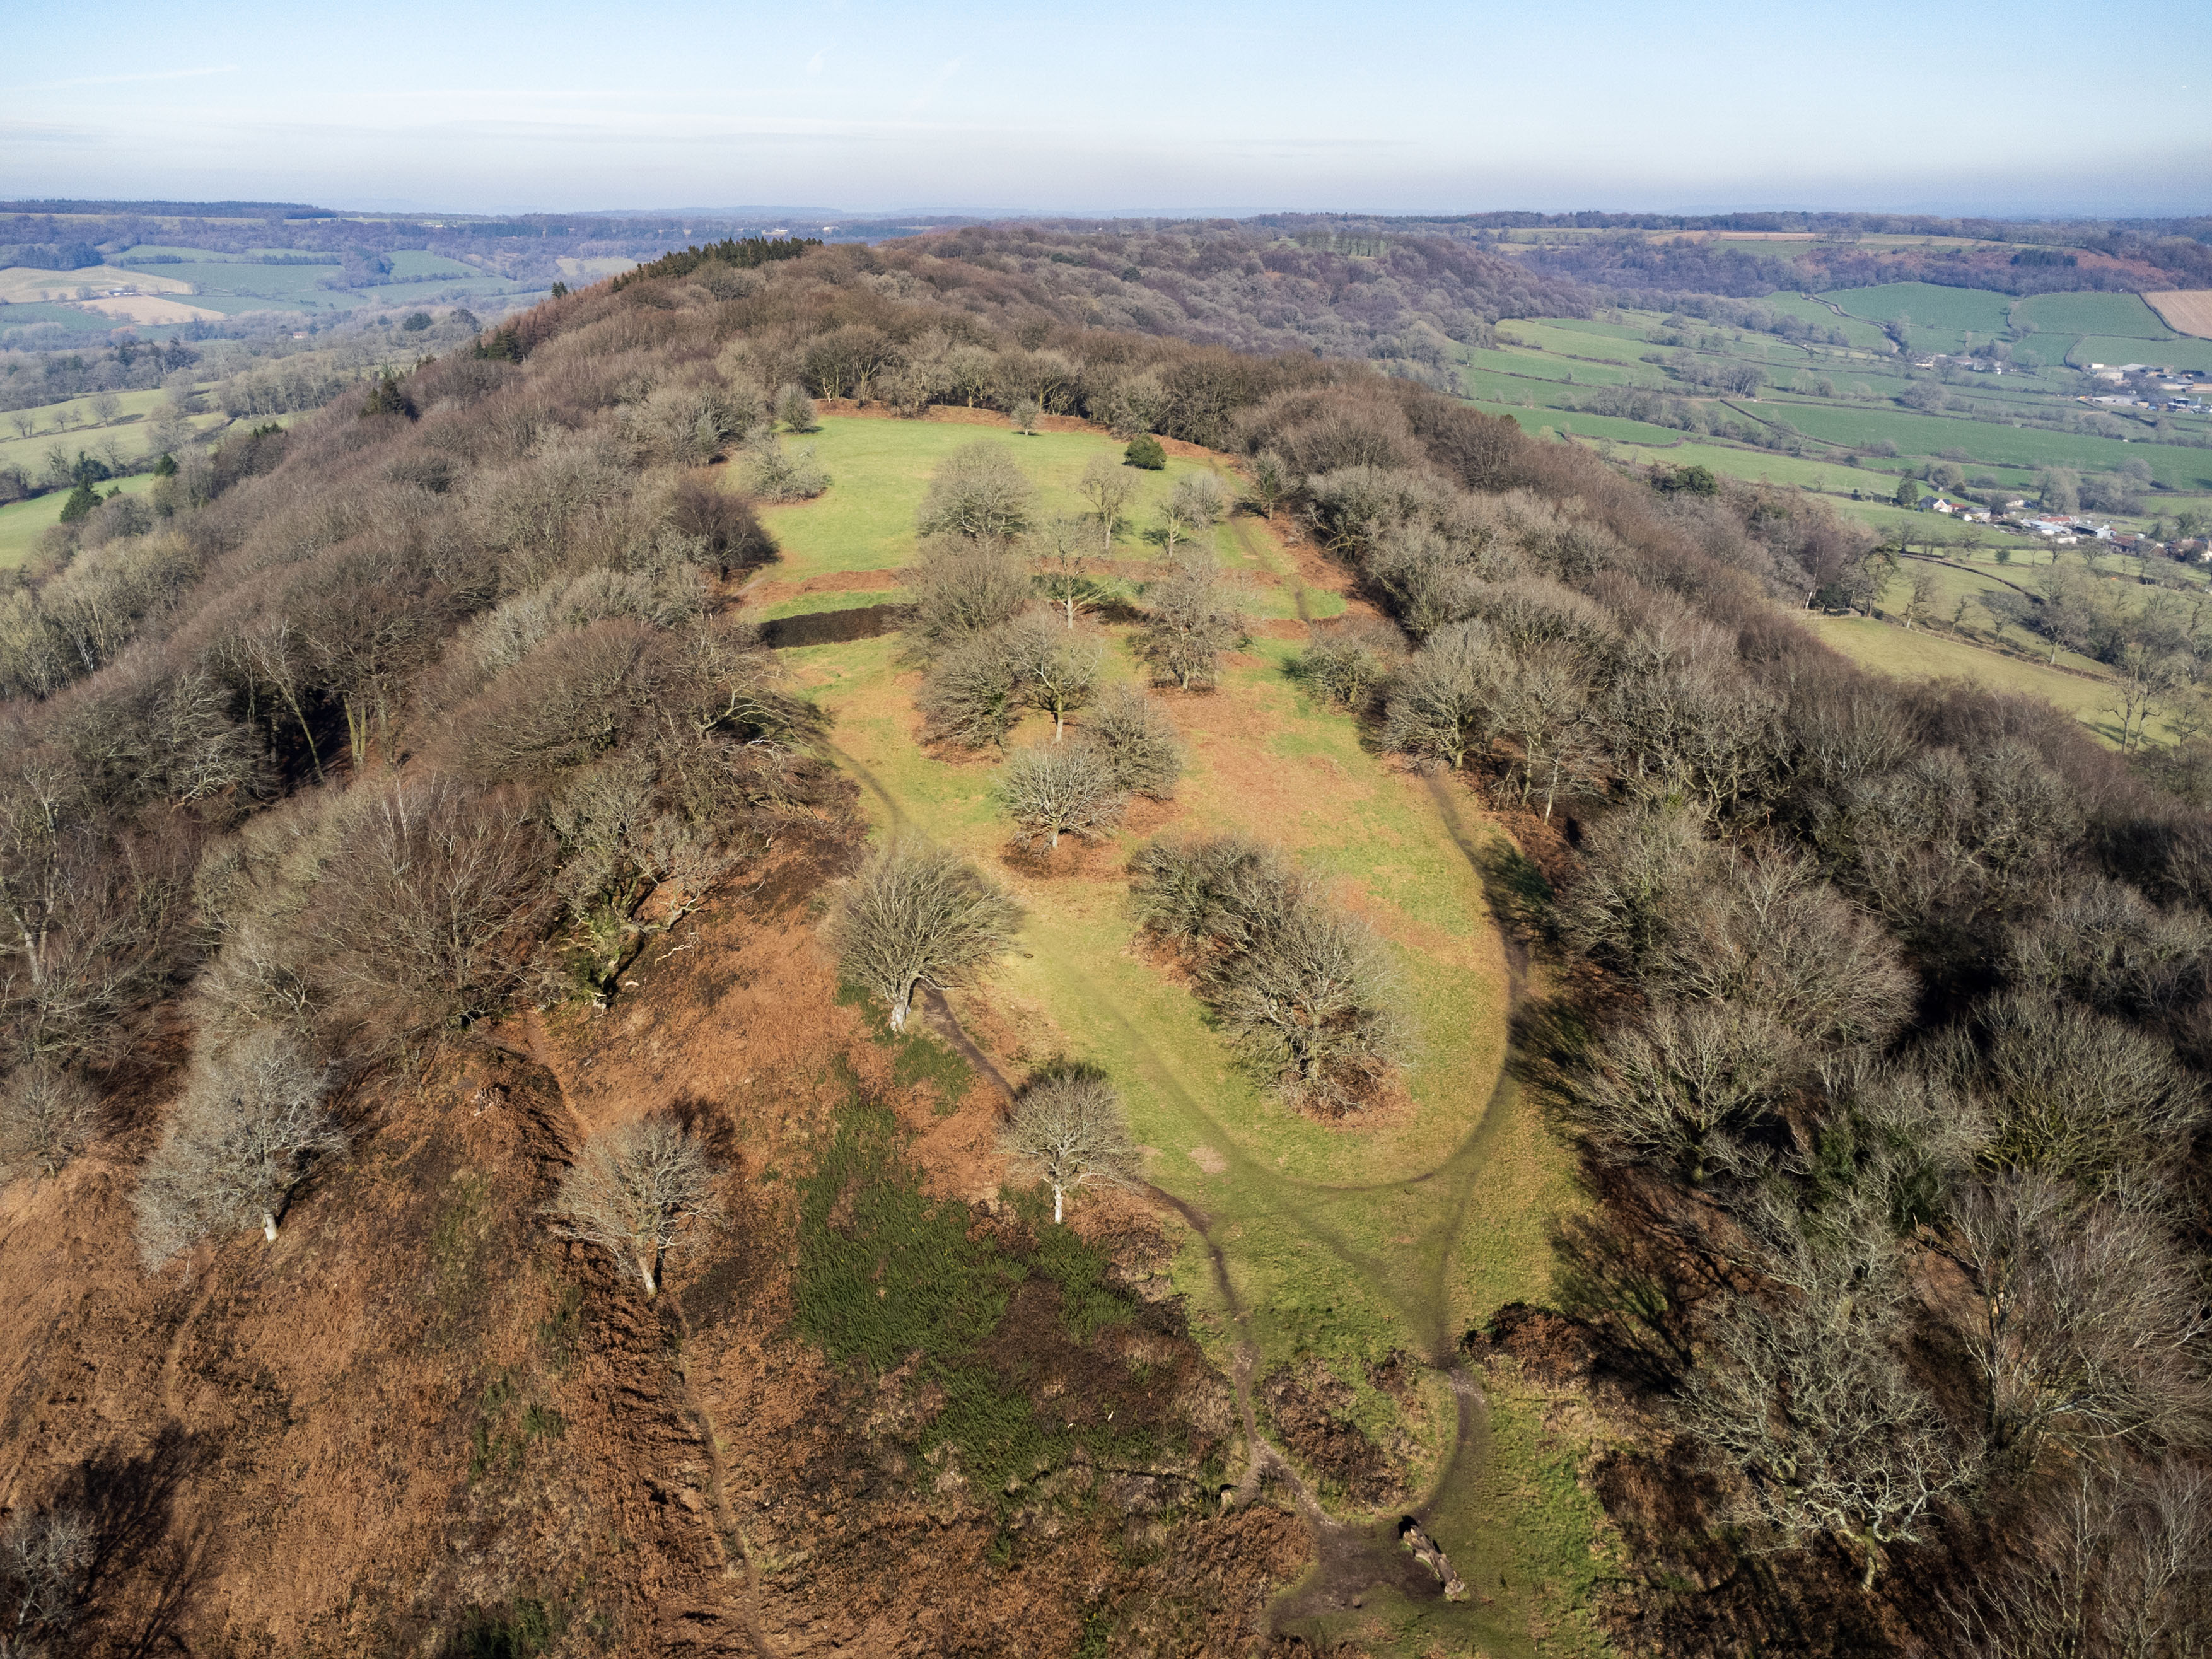 An aerial photograph showing a view over a landscape with a large promontory in the foreground. It has archaeological features on it, forming an oval-shaped enclosure.